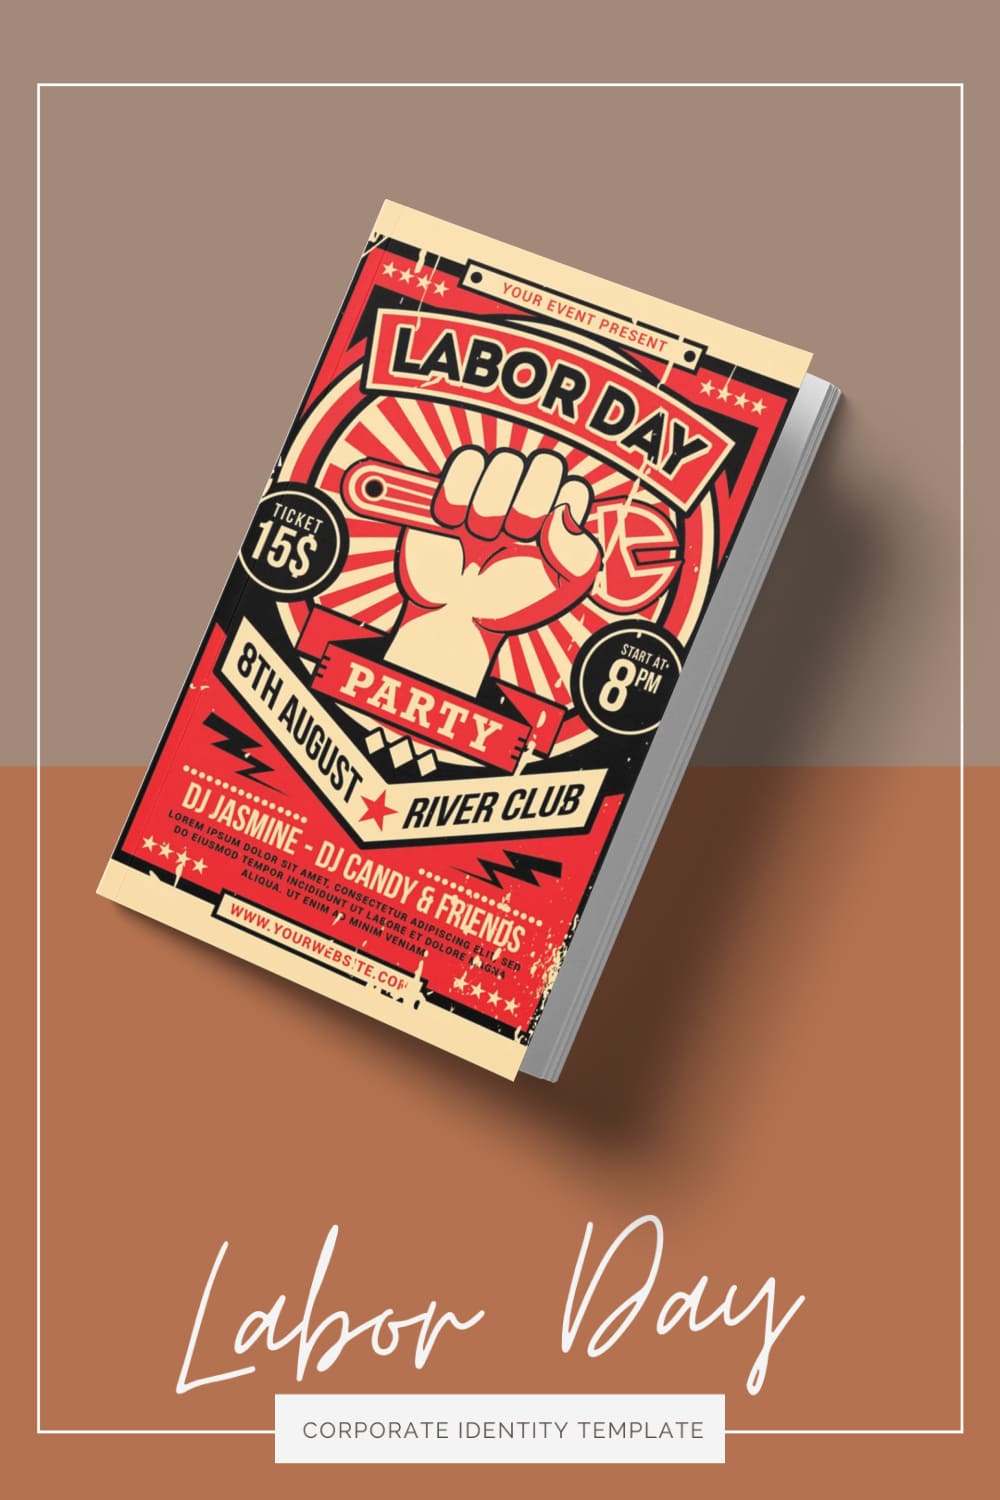 Labor Day Flyer - Corporate Identity Template - Pinterest.